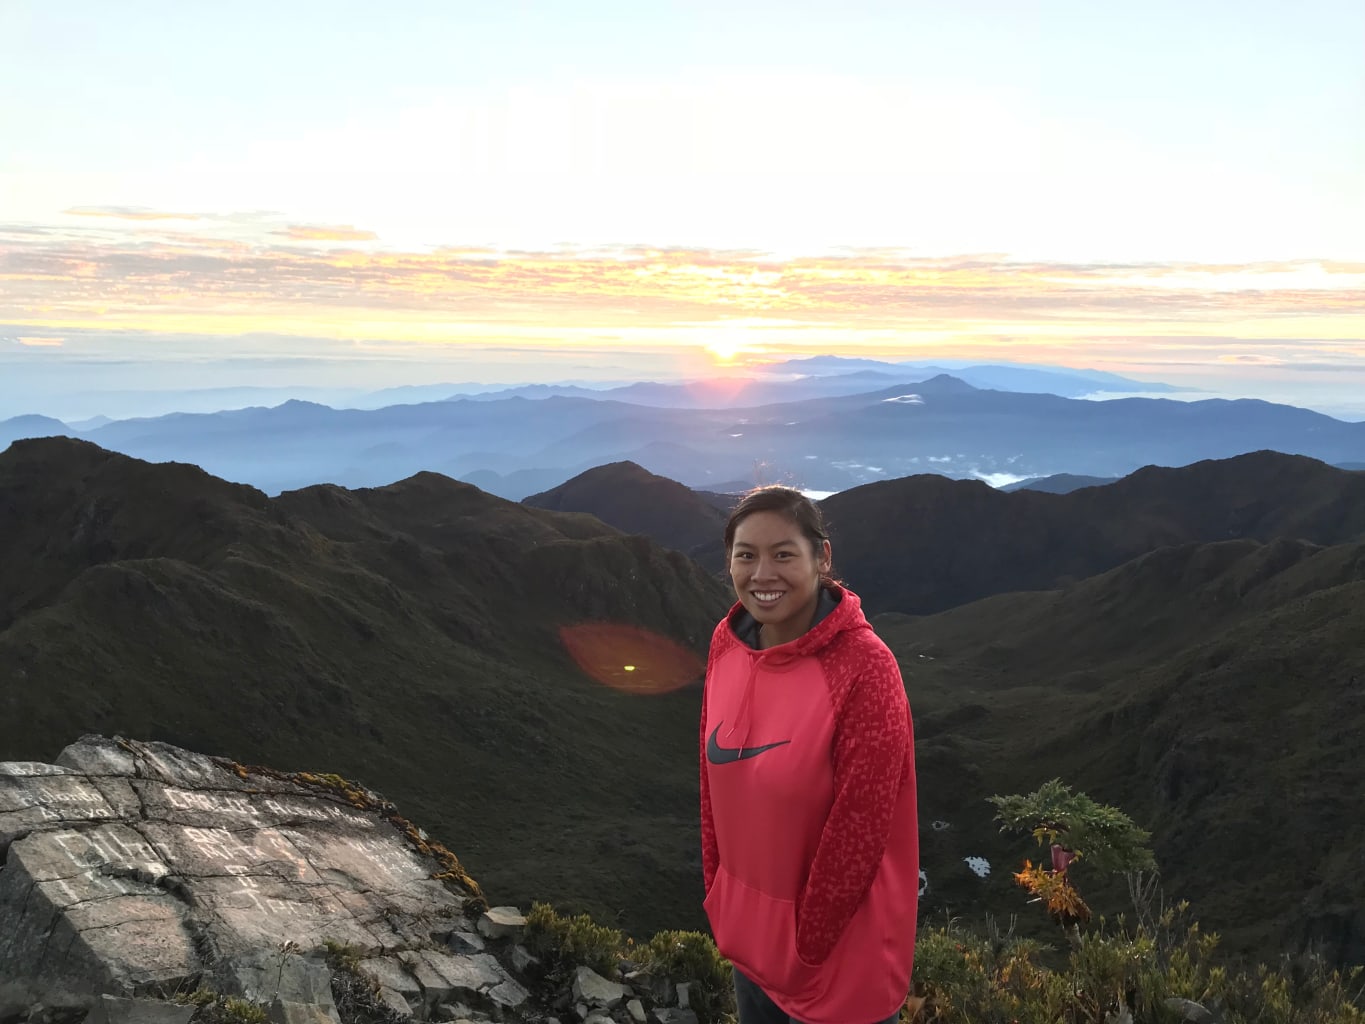 A student on a mountain with a view of a sunset in the background.